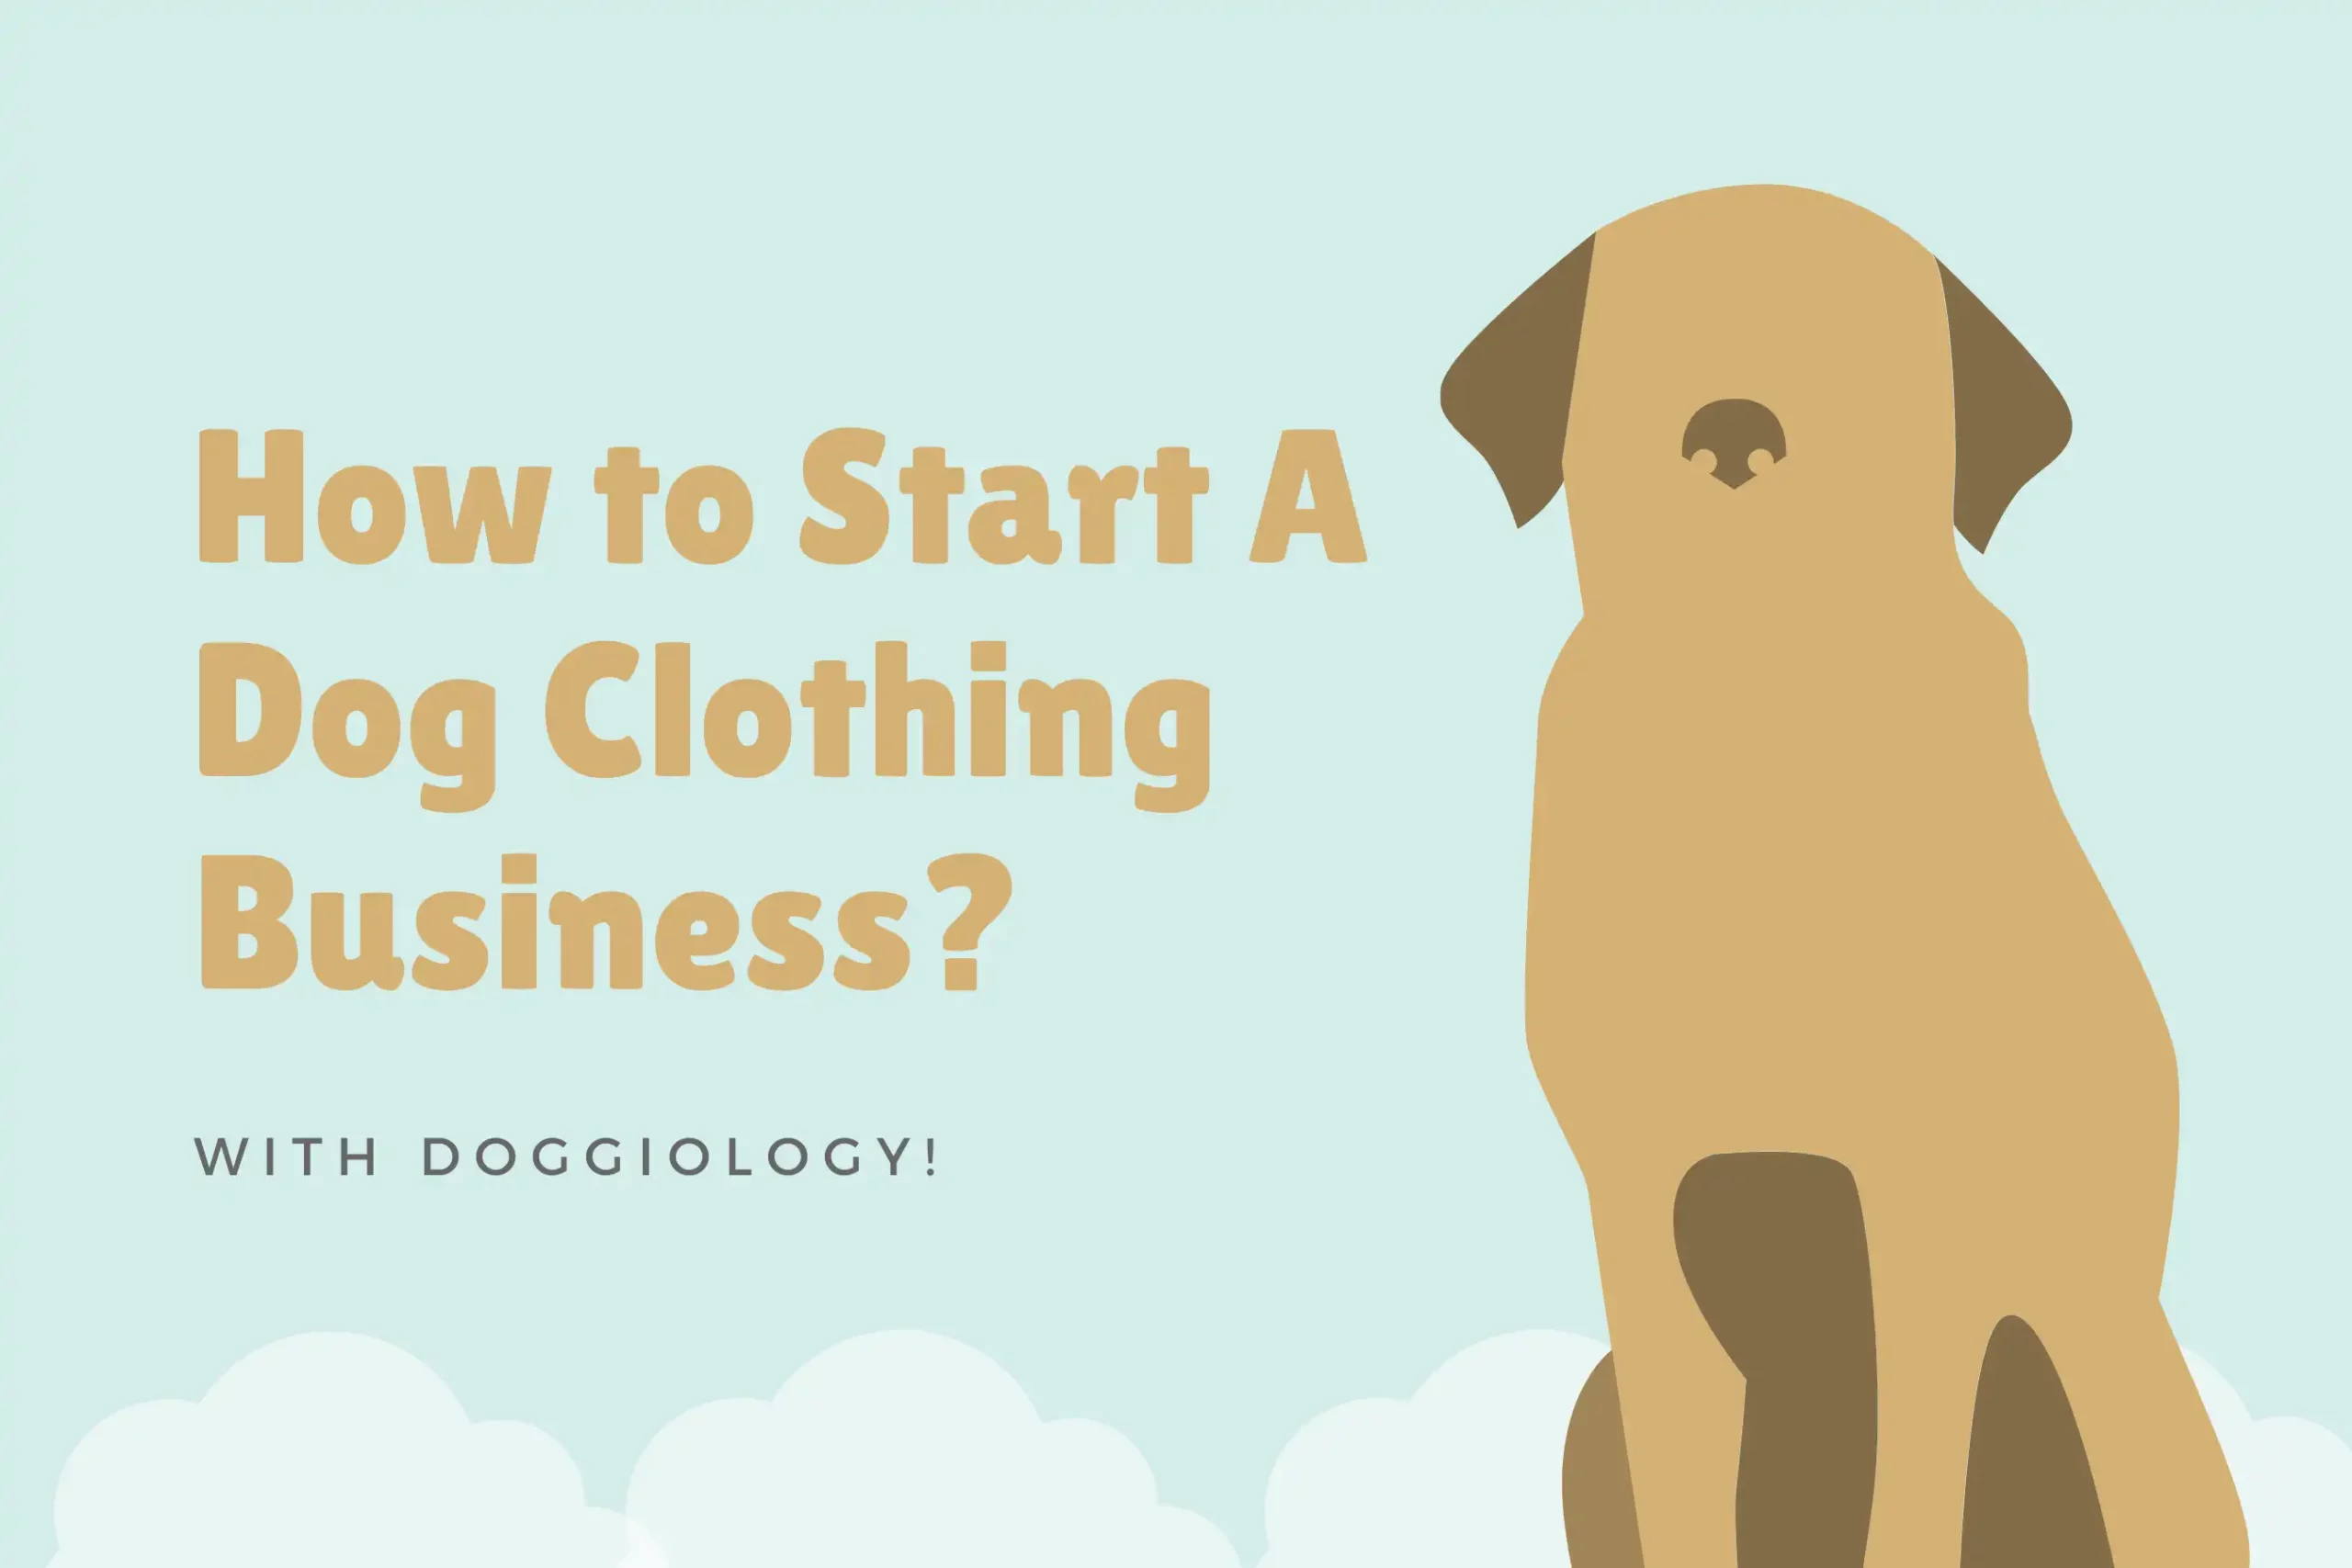 How to Start A Dog Clothing Business?